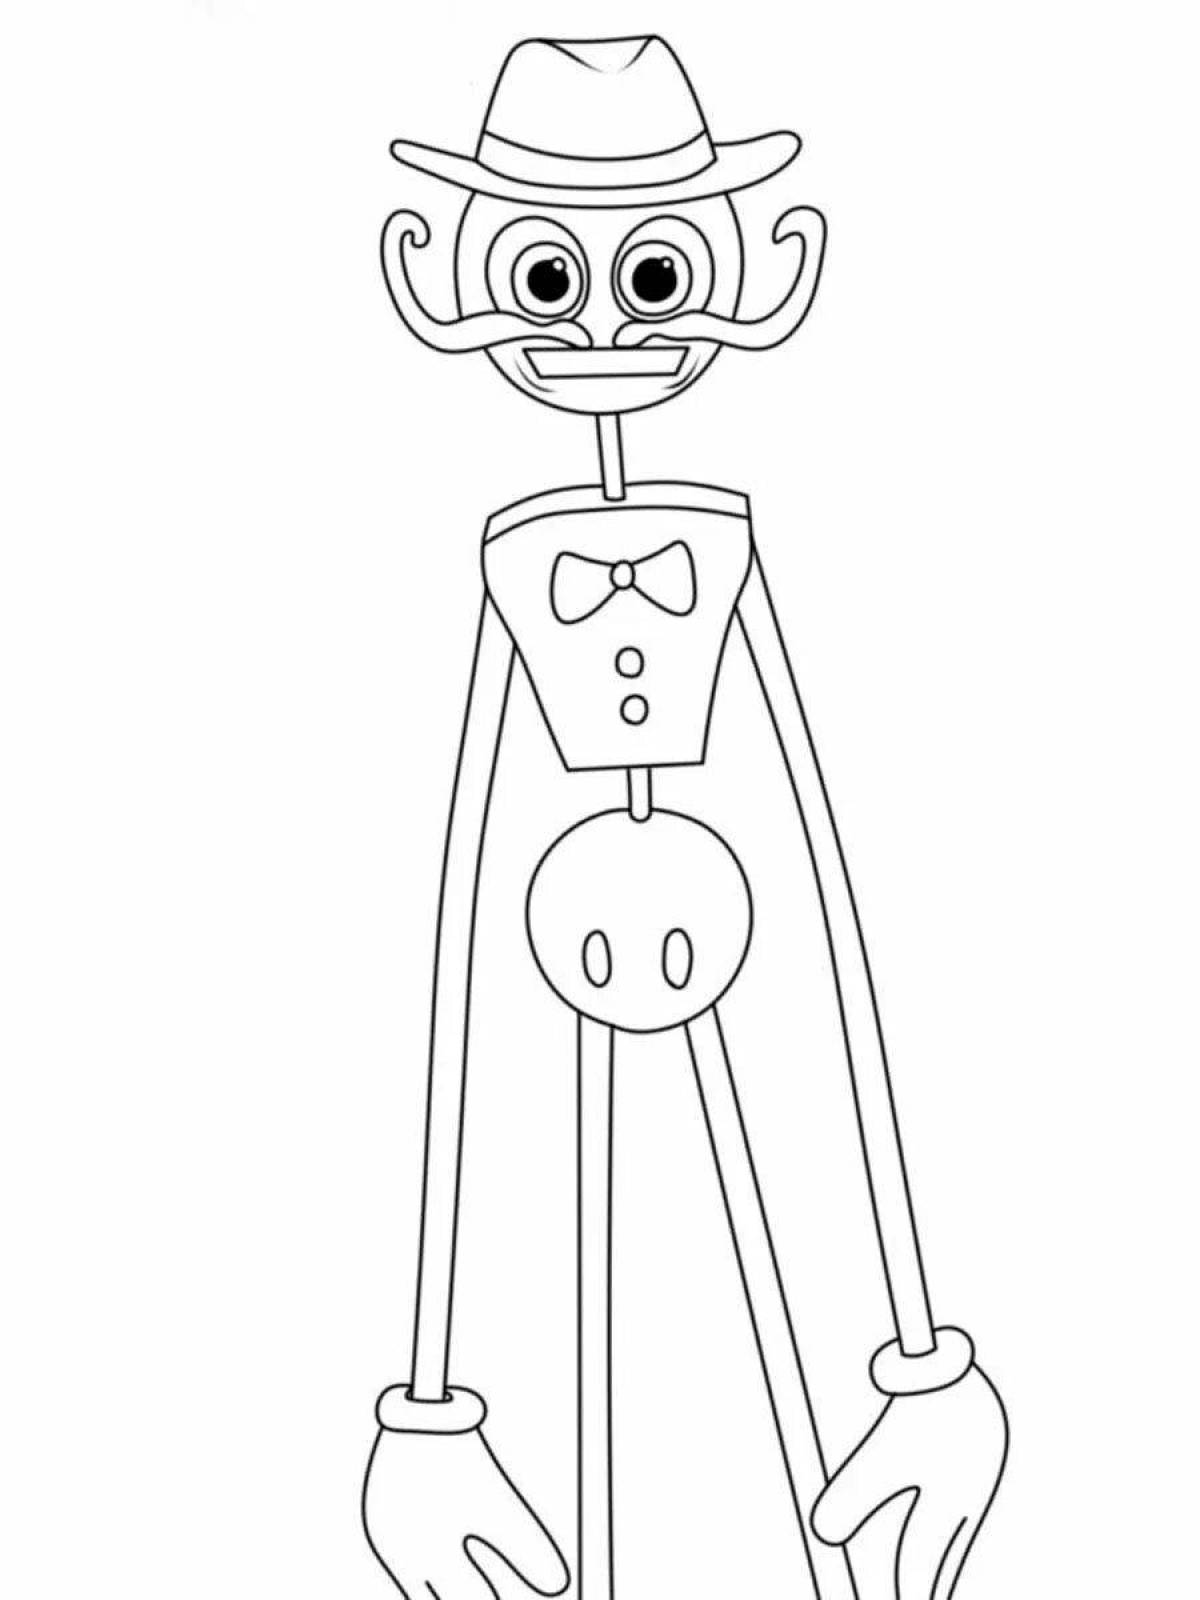 Coloring book playful mommy with long legs